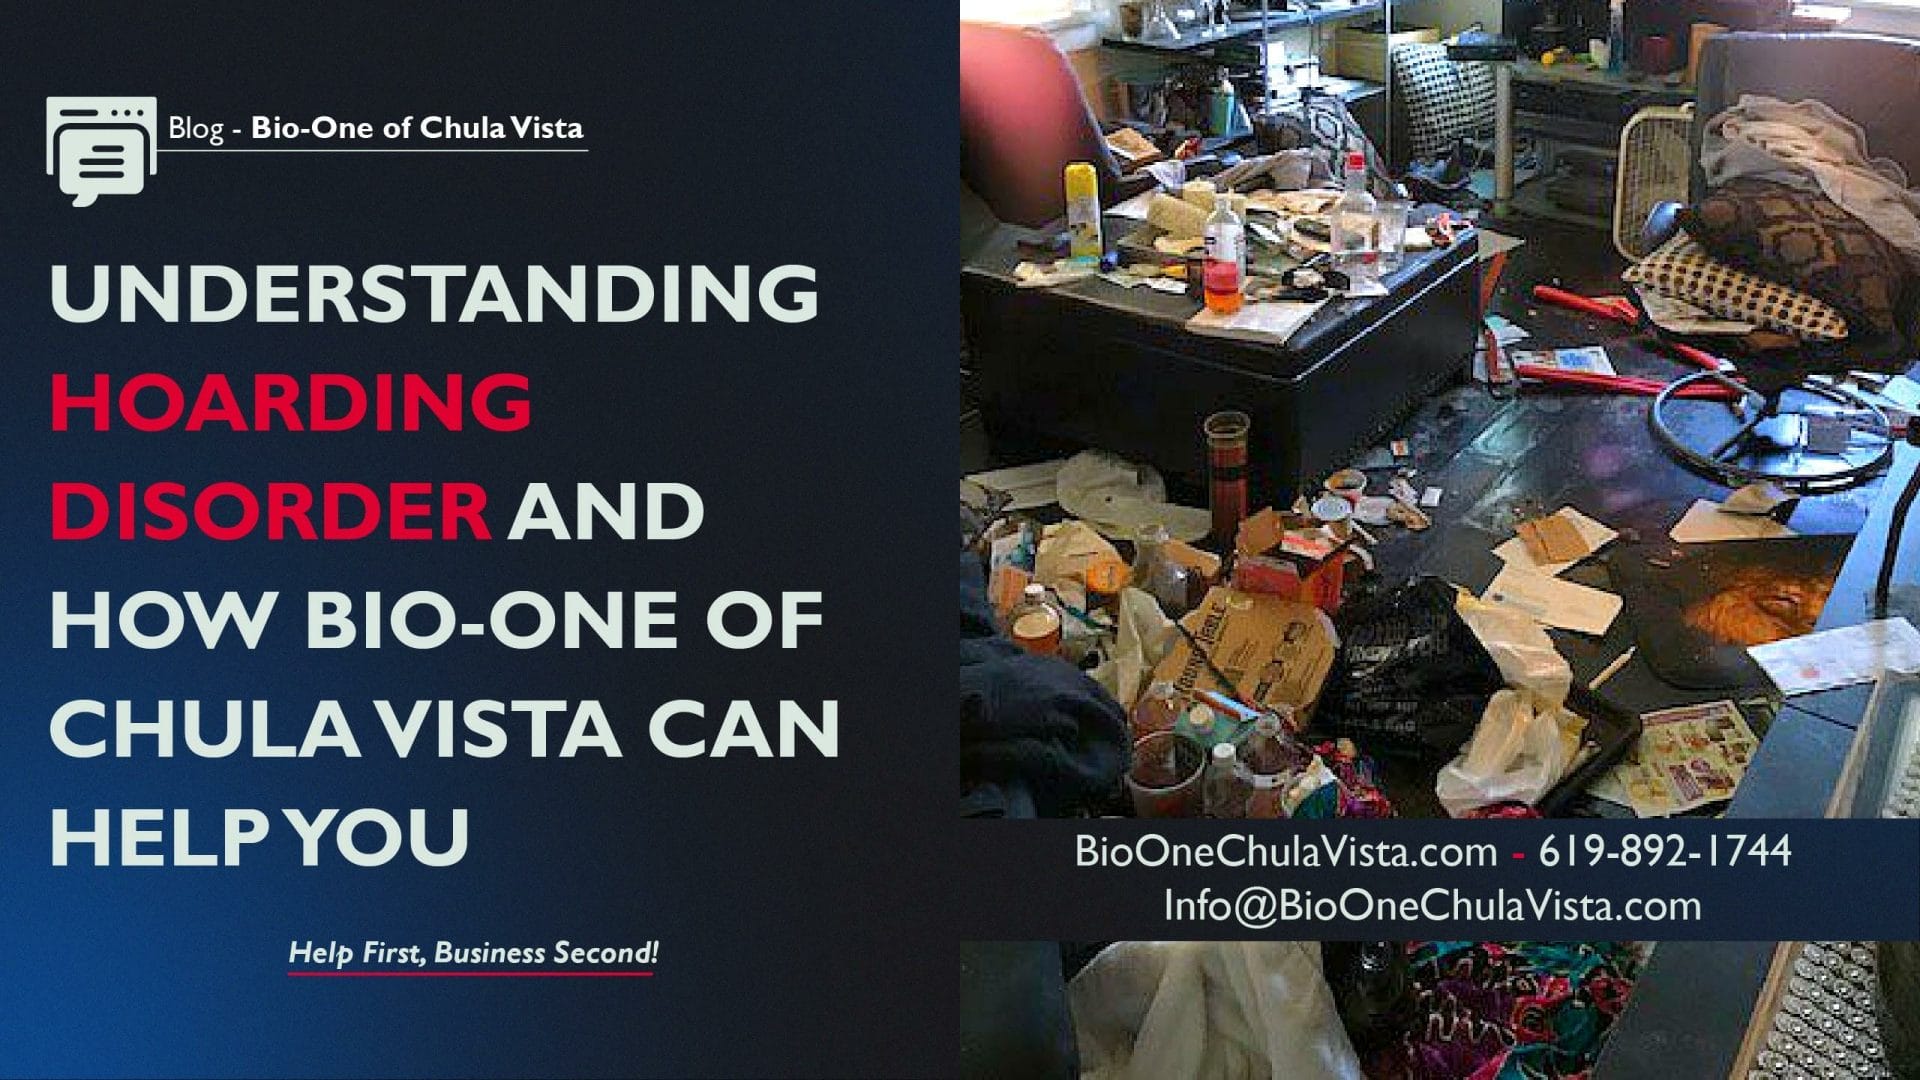 Understanding hoarding disorder and how Bio-One of Chula Vista can help